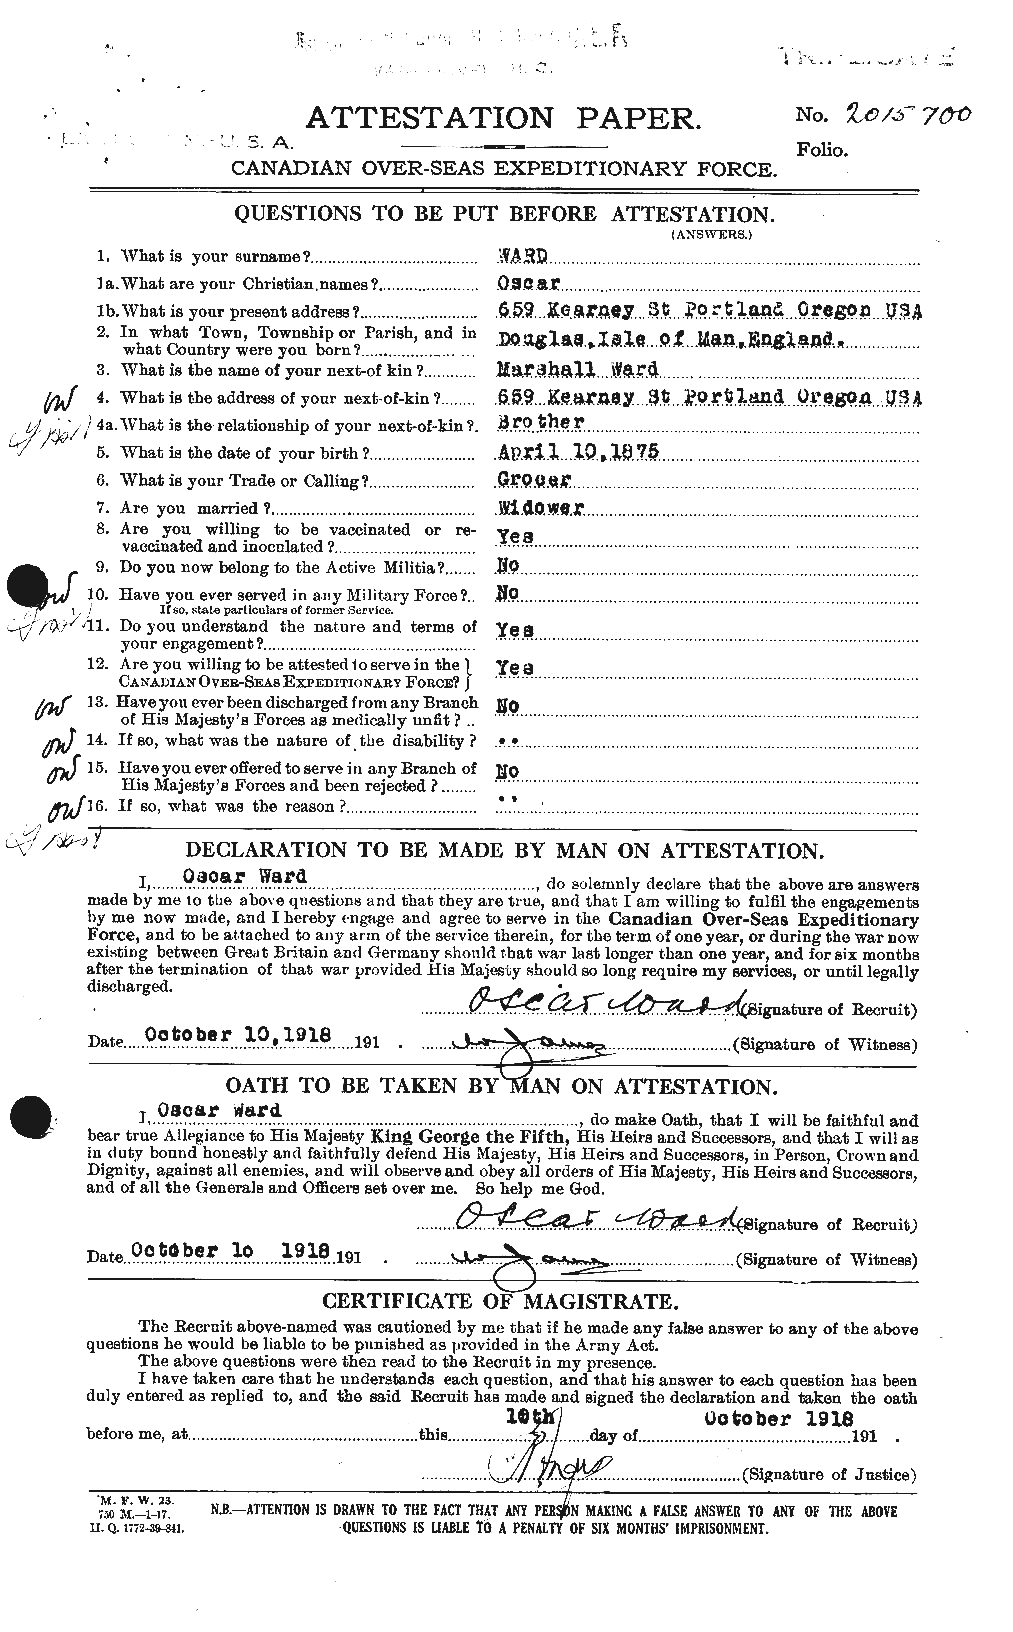 Personnel Records of the First World War - CEF 659615a